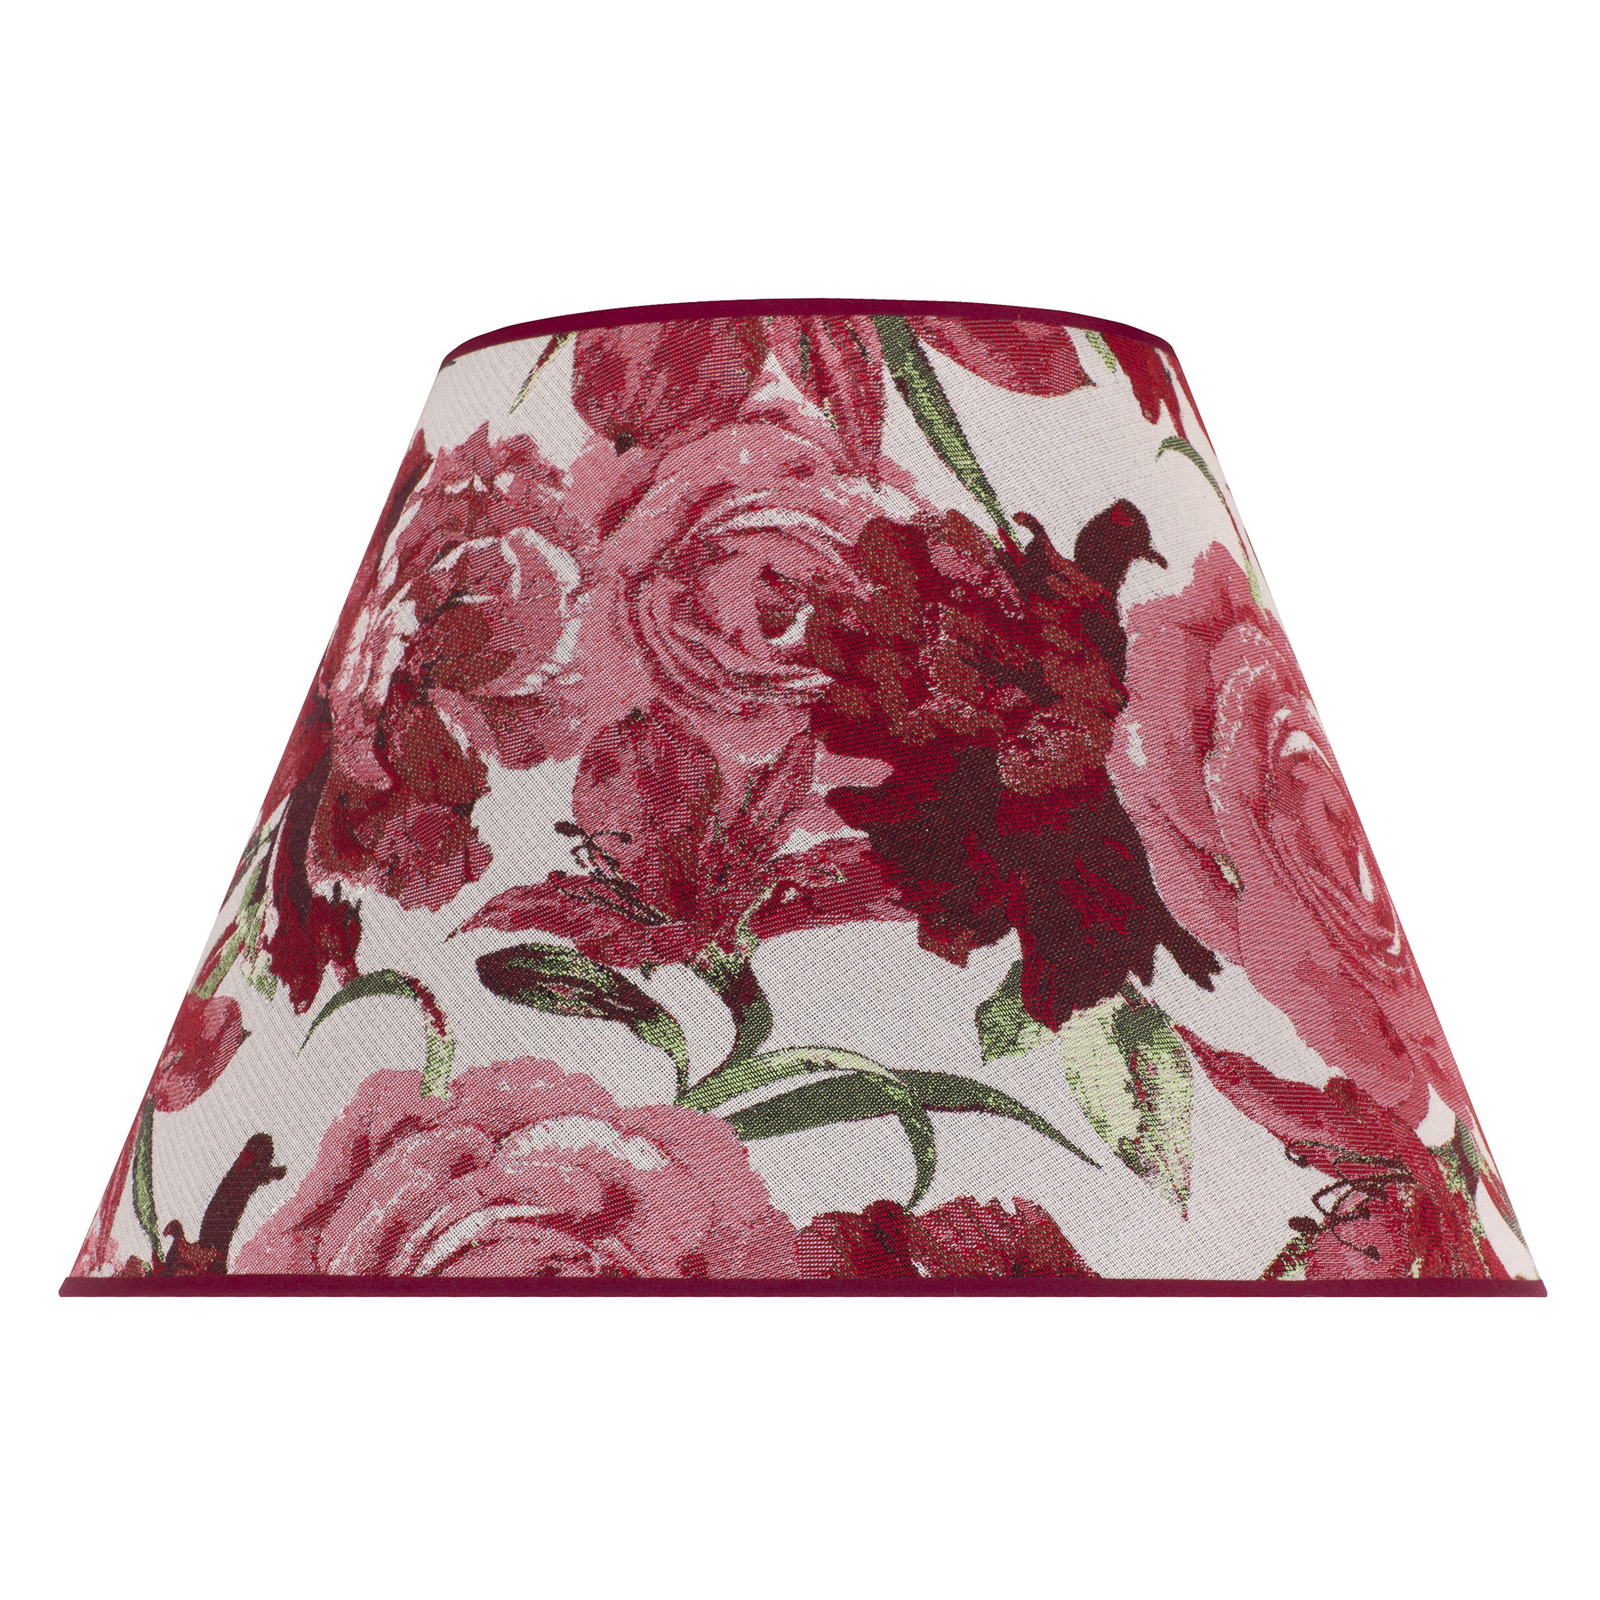 Sofia lampshade height 26 cm, floral pattern red